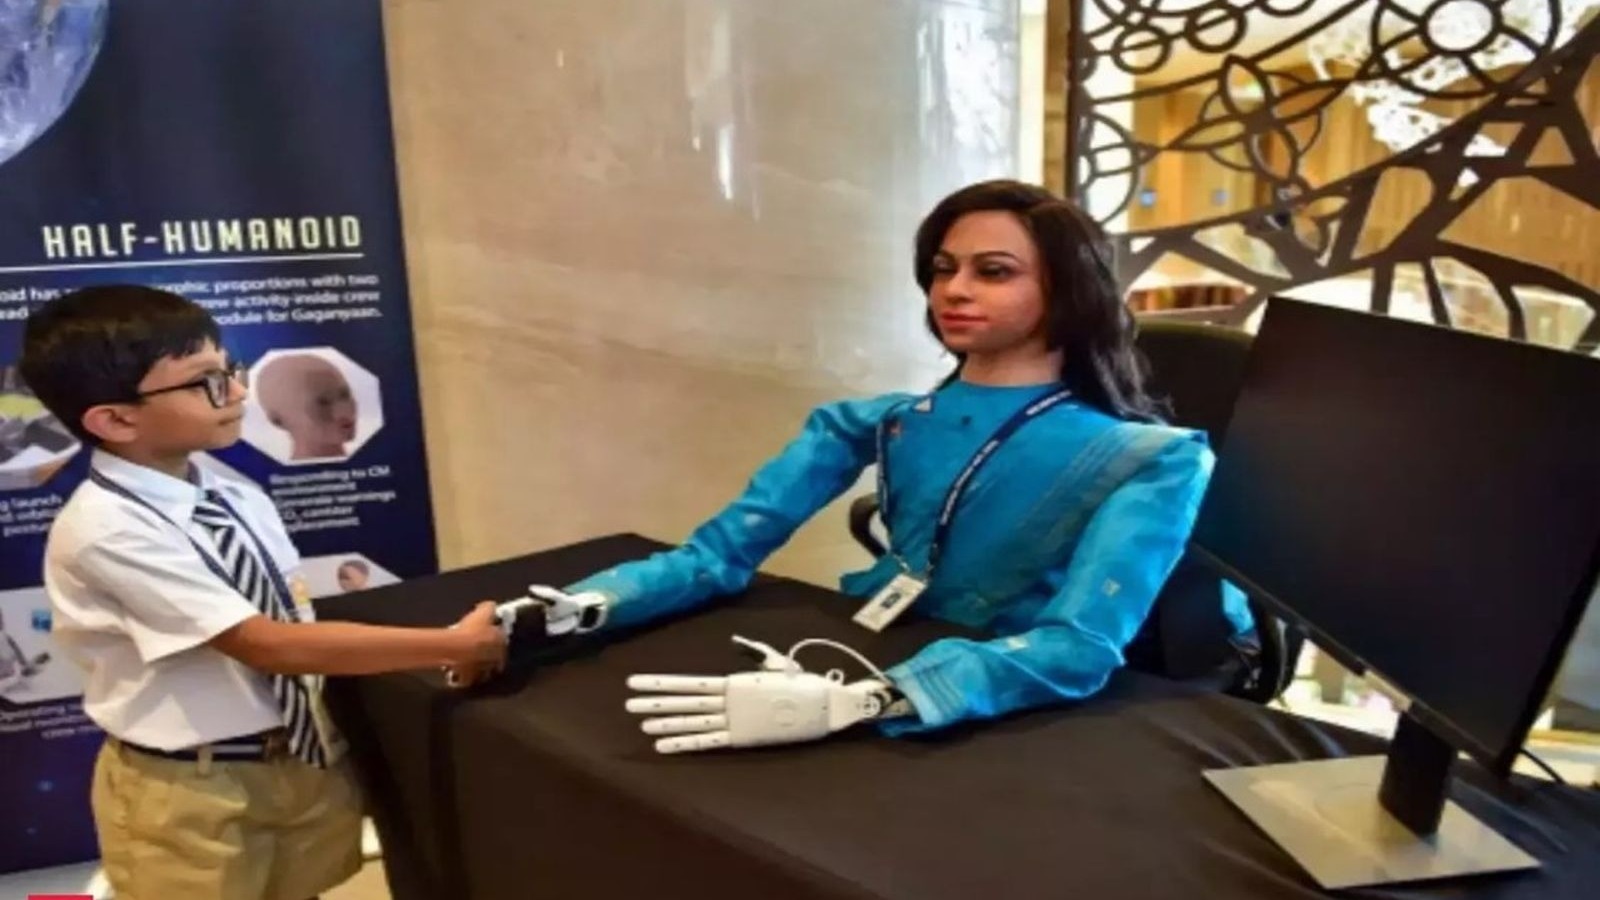 vyommitra-is-the-humanoid-robot-india-is-sending-to-space-slashgear